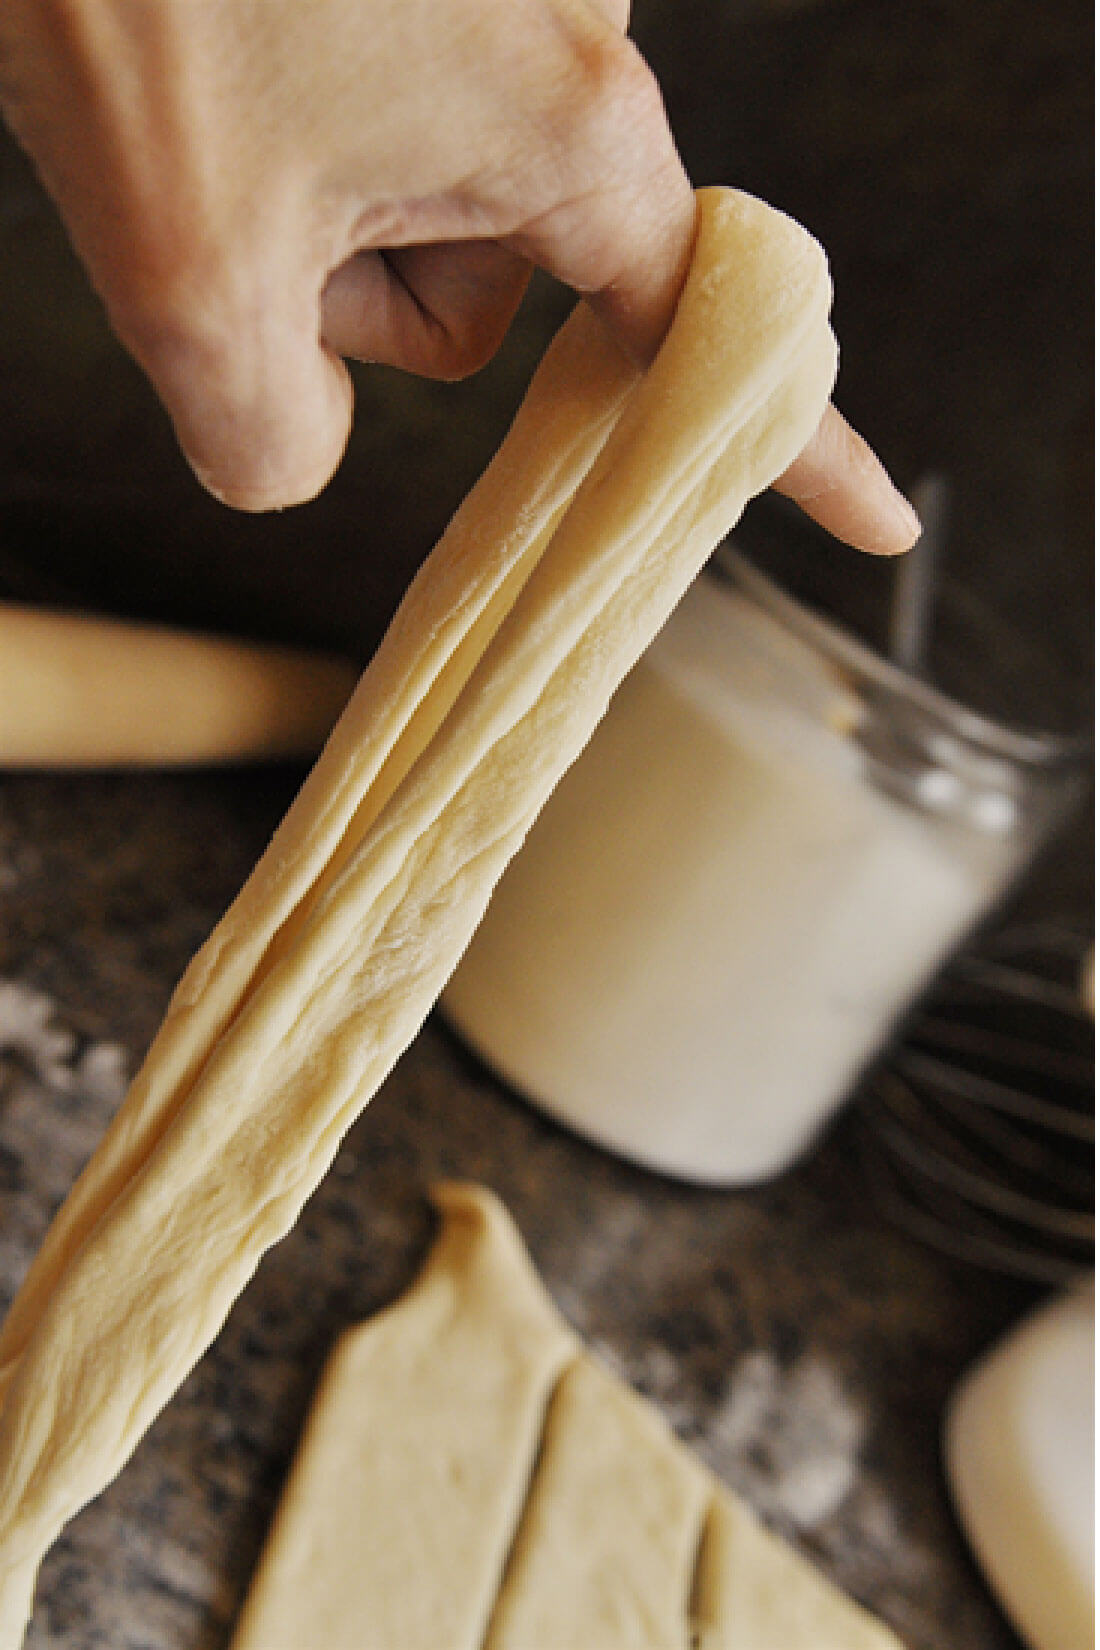 Cinnamon Sugar Breadsticks with Cream Cheese Frosting -step 5, drape finger over